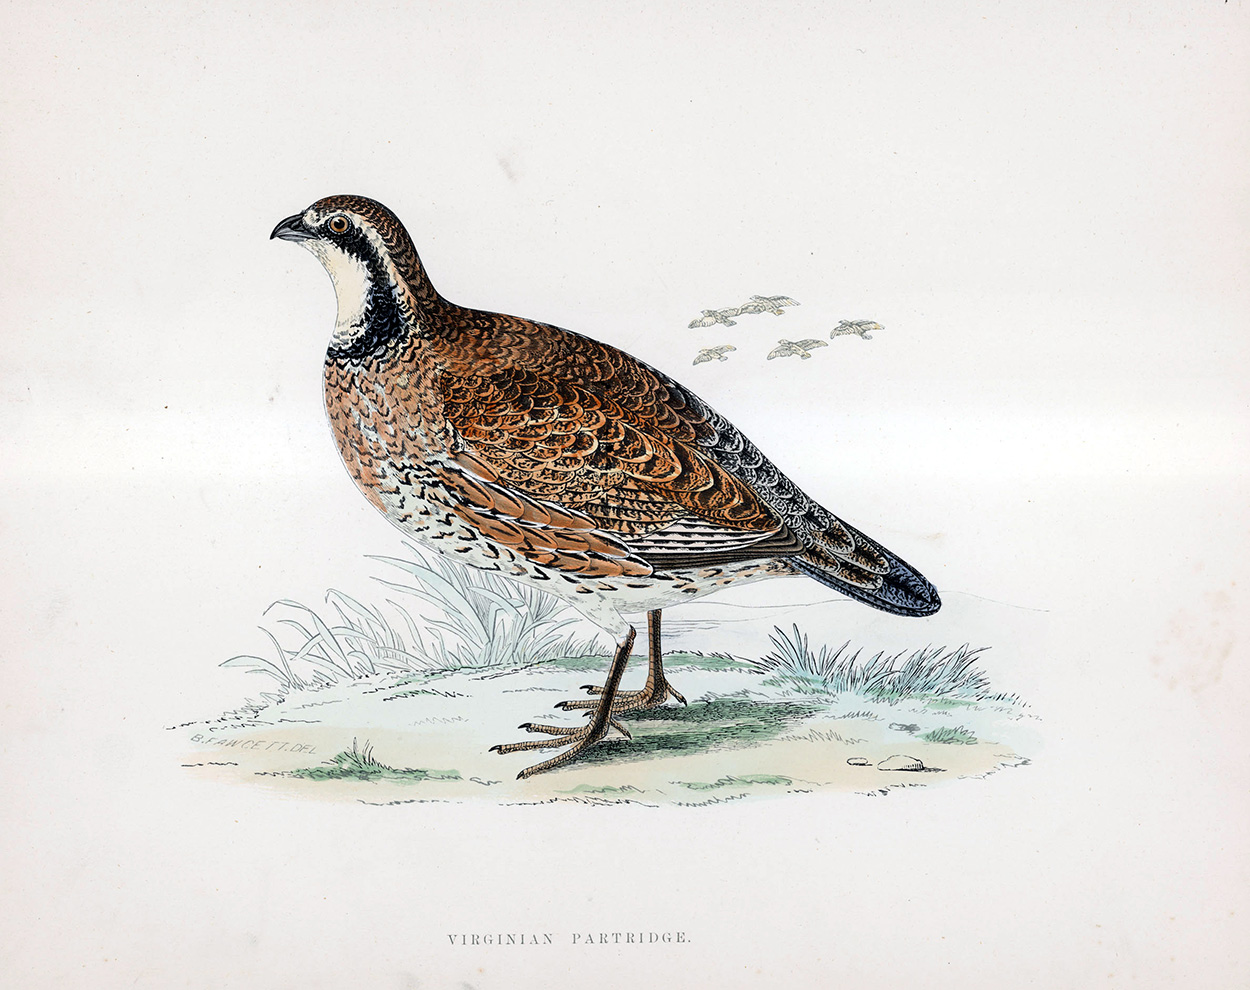 Virginian Partridge - hand coloured lithograph 1891 (Print) art by Beverley R Morris Art at The Illustration Art Gallery